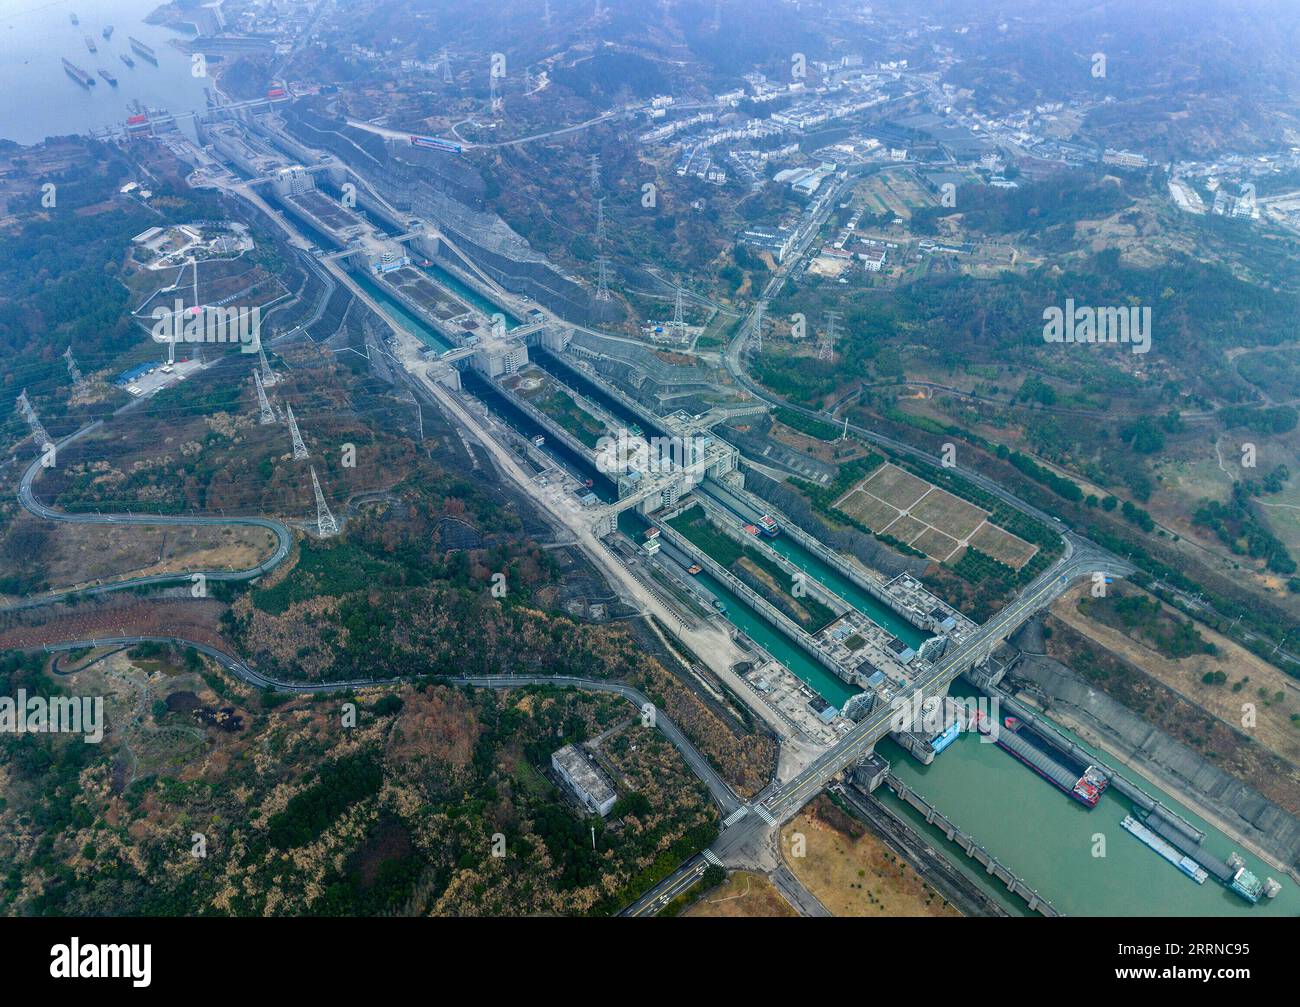 230102 -- YICHANG, Jan. 2, 2023 -- This aerial photo taken on Jan. 2, 2023 shows ships passing through the five-tier ship locks of the Three Gorges Dam in Yichang, central China s Hubei Province. The shipping throughput of the Three Gorges Dam, the world s largest hydropower project, hit a new record in 2022, the Three Gorges Navigation Authority said Monday.  The project s total throughput reached 159.8 million tonnes in 2022, an increase of 6.12 percent year on year.  In 2022, the cargo throughput of the project was 159.65 million tonnes, a year-on-year increase of 6.53 percent. Meanwhile, t Stock Photo